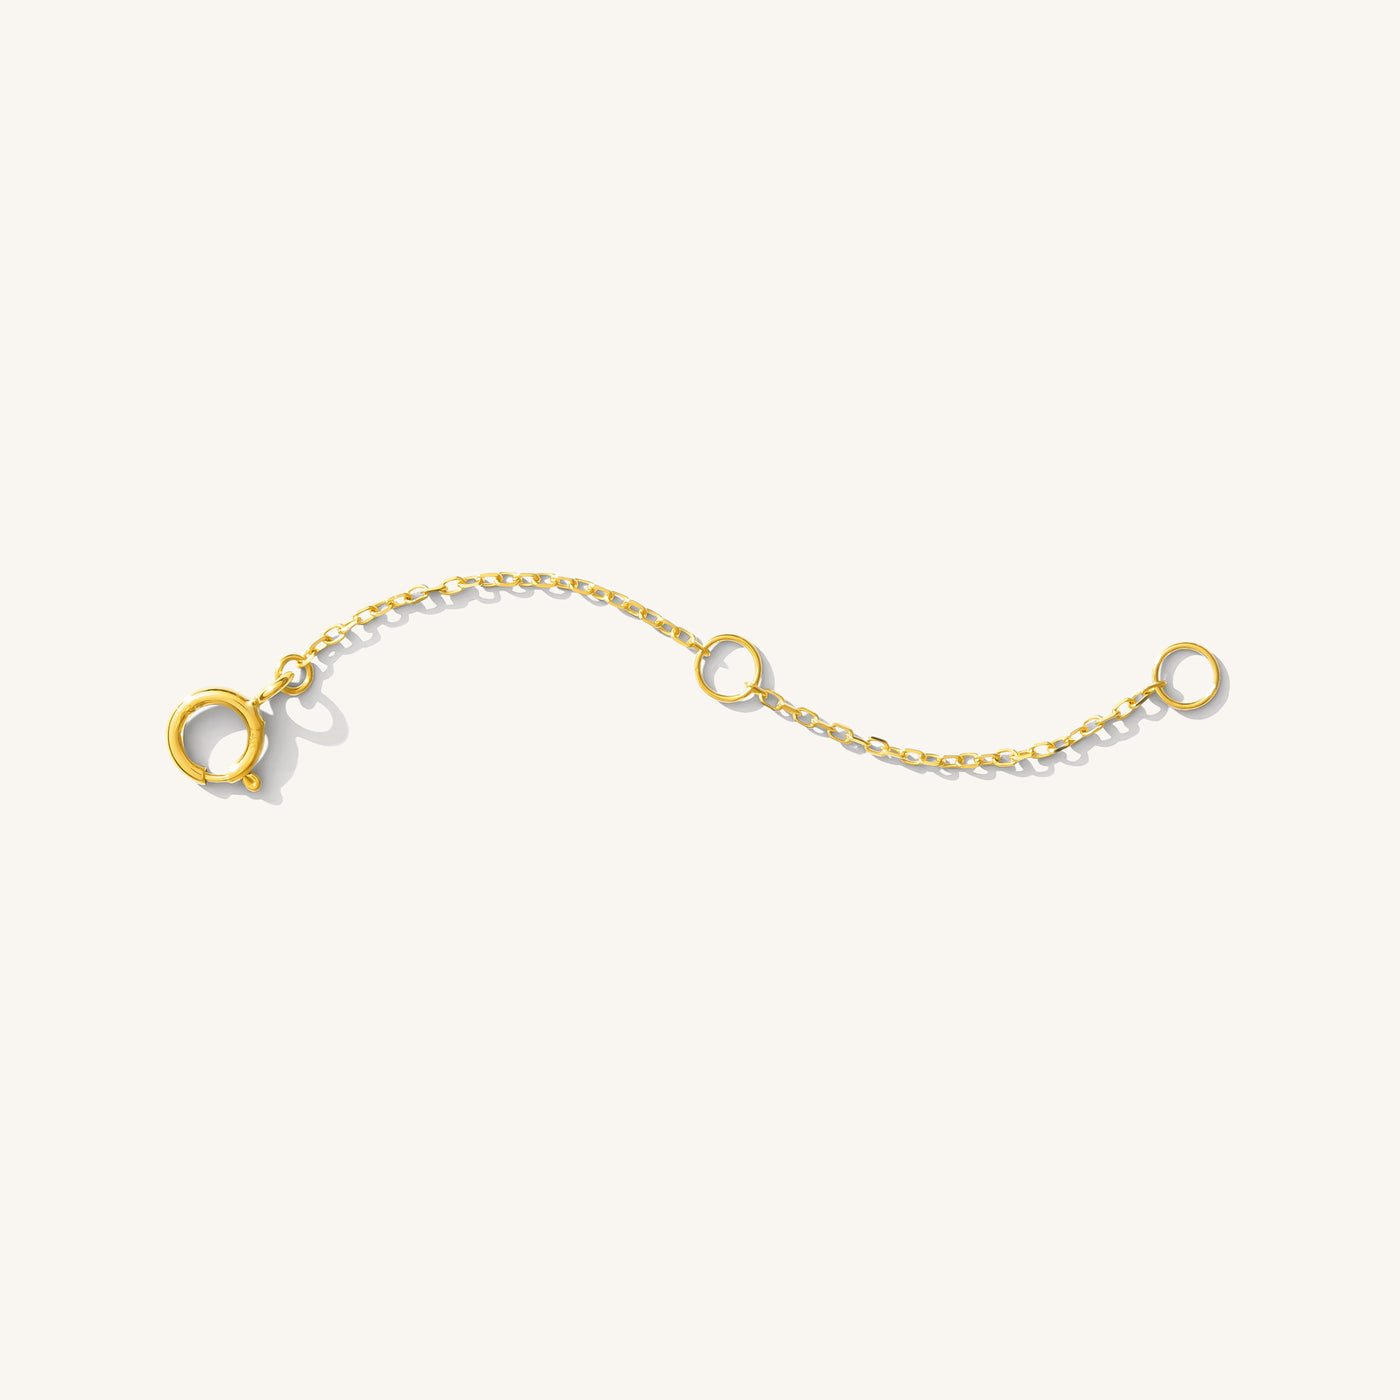 Removable Extender - 14k Solid Gold | Simple & Dainty Jewelry